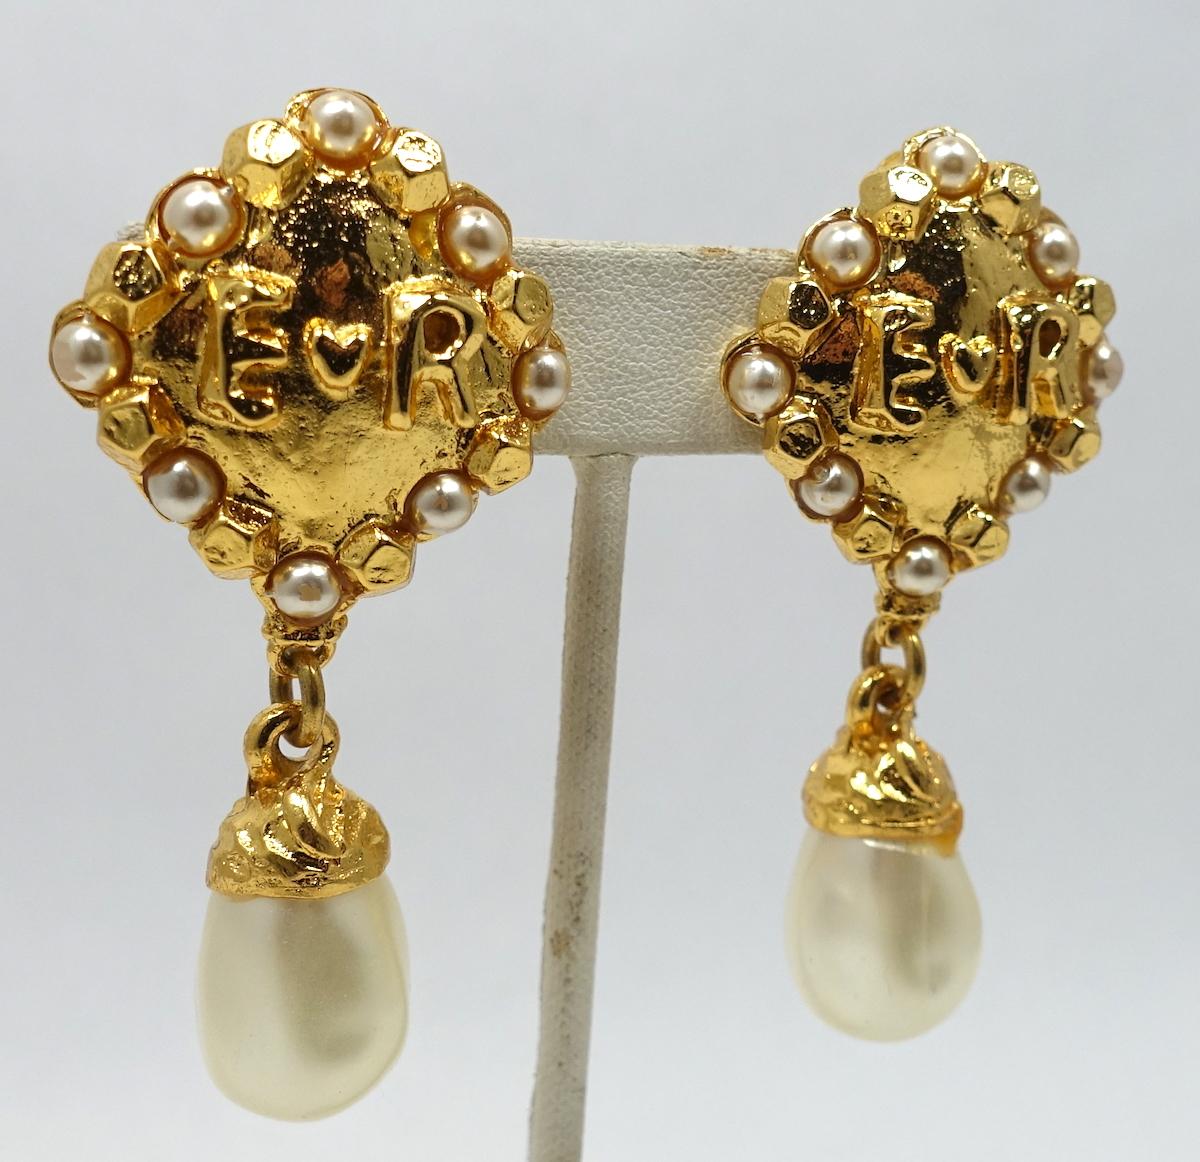 These vintage signed Edouard Rambaud earrings have faux pearls on a gold tone setting with the initials “E R” in the middle of the top with gold tone beading on the outside. A faux pearl hangs down.  In excellent condition, these clip earrings